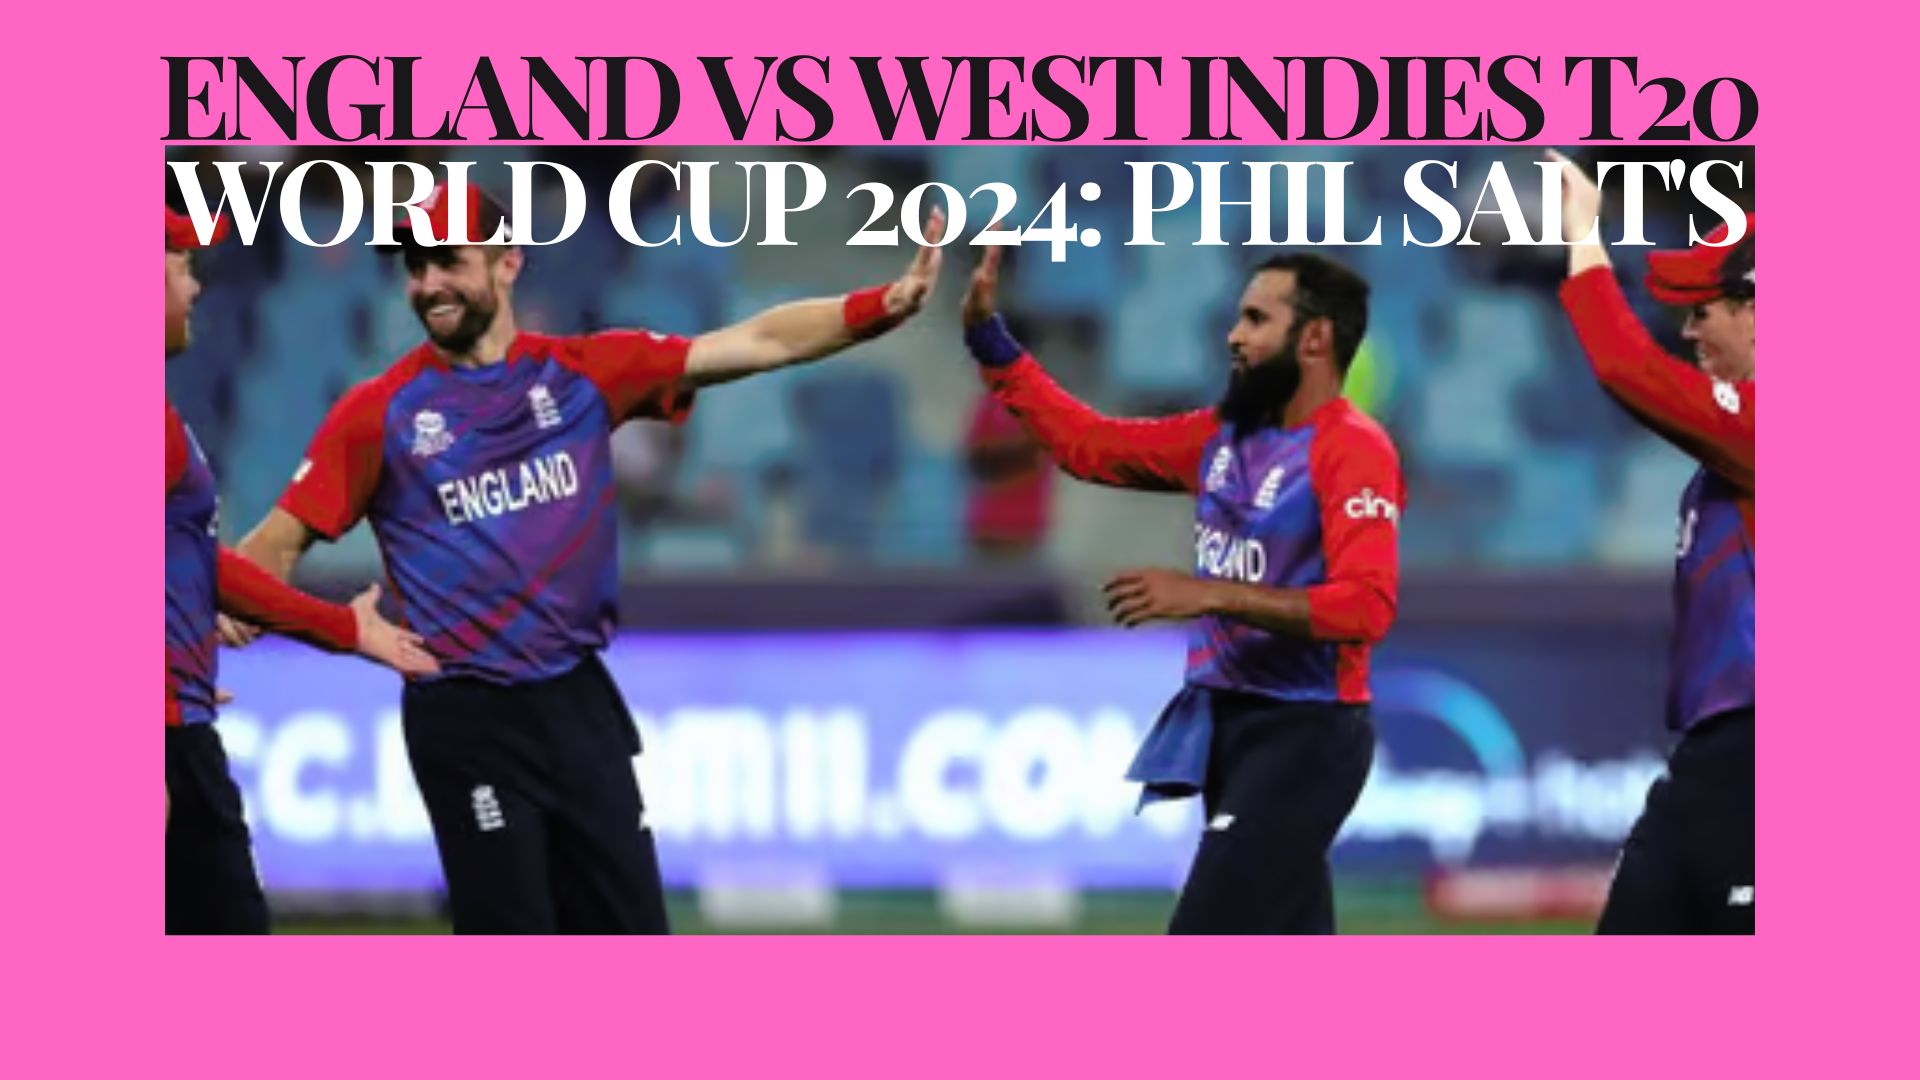 England vs West Indies T20 World Cup 2024